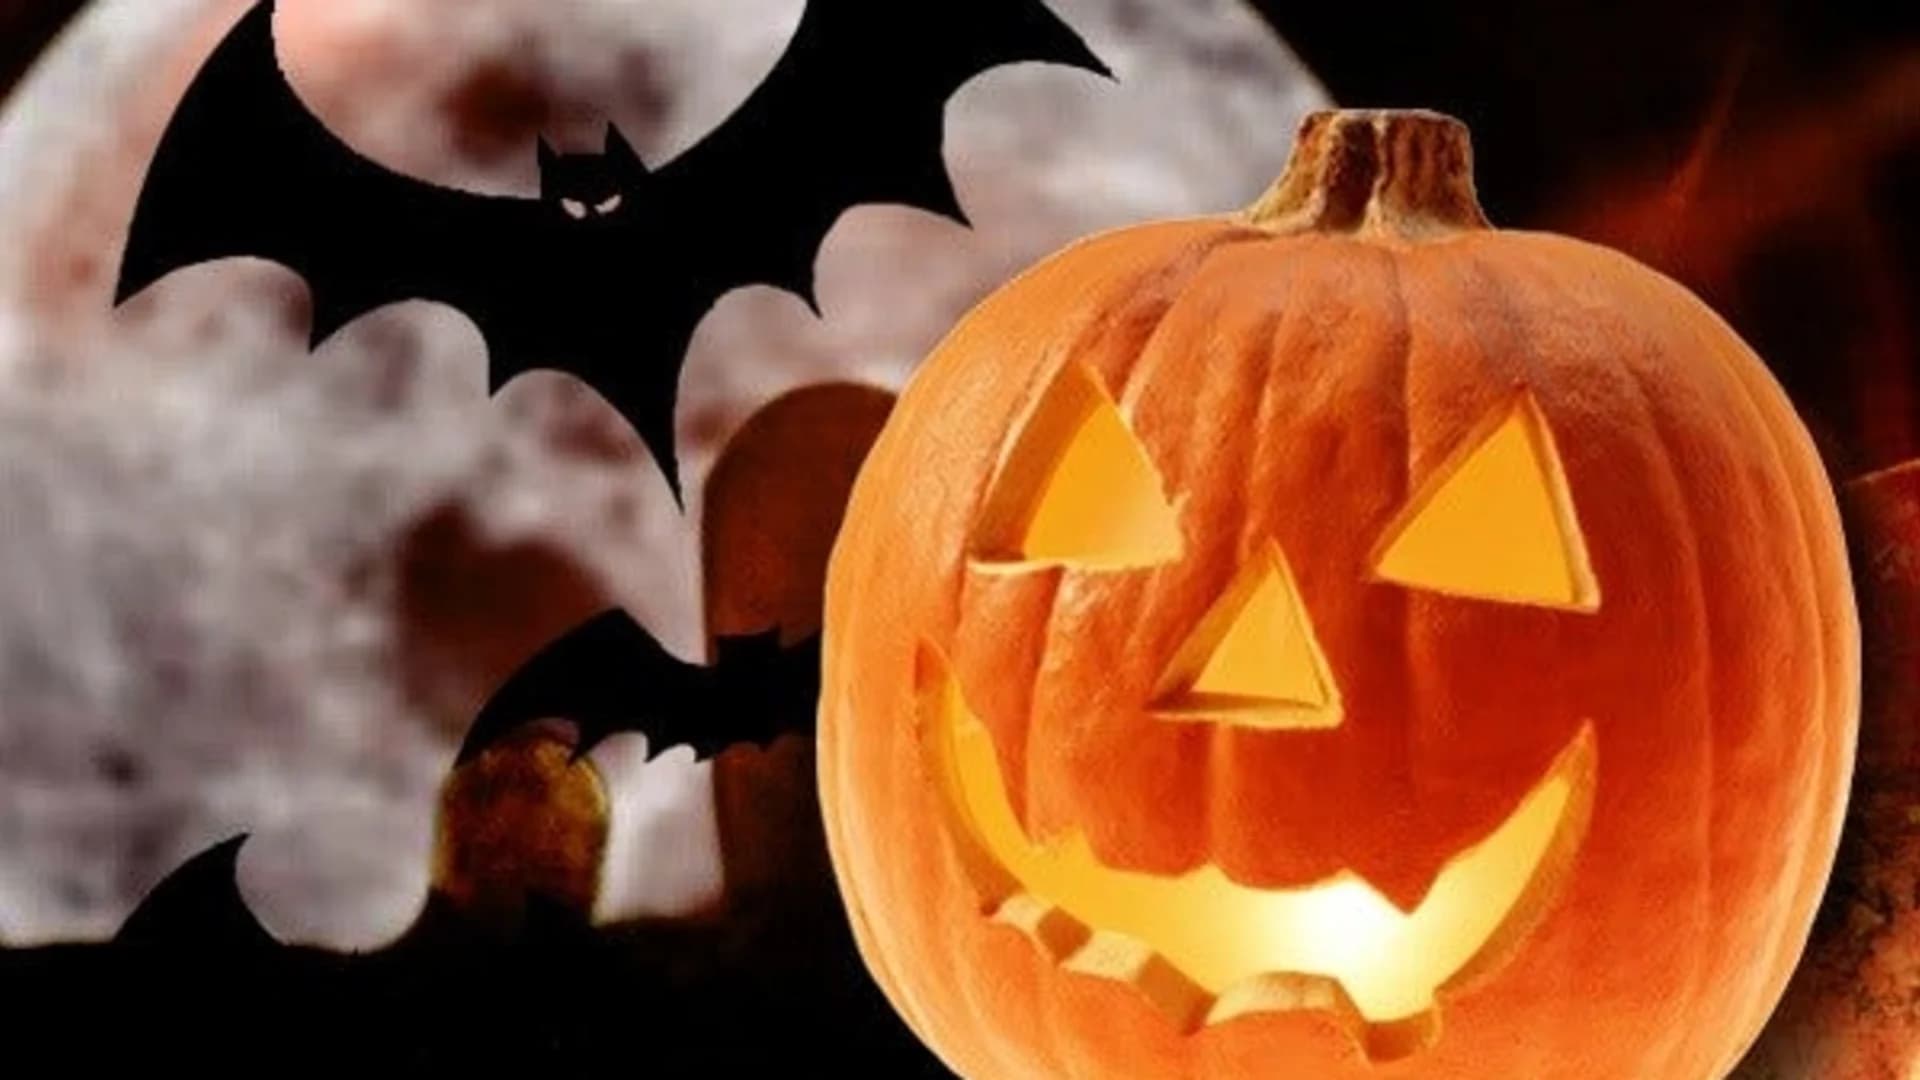 Police warn parents about sexual predators ahead of trick-or-treating